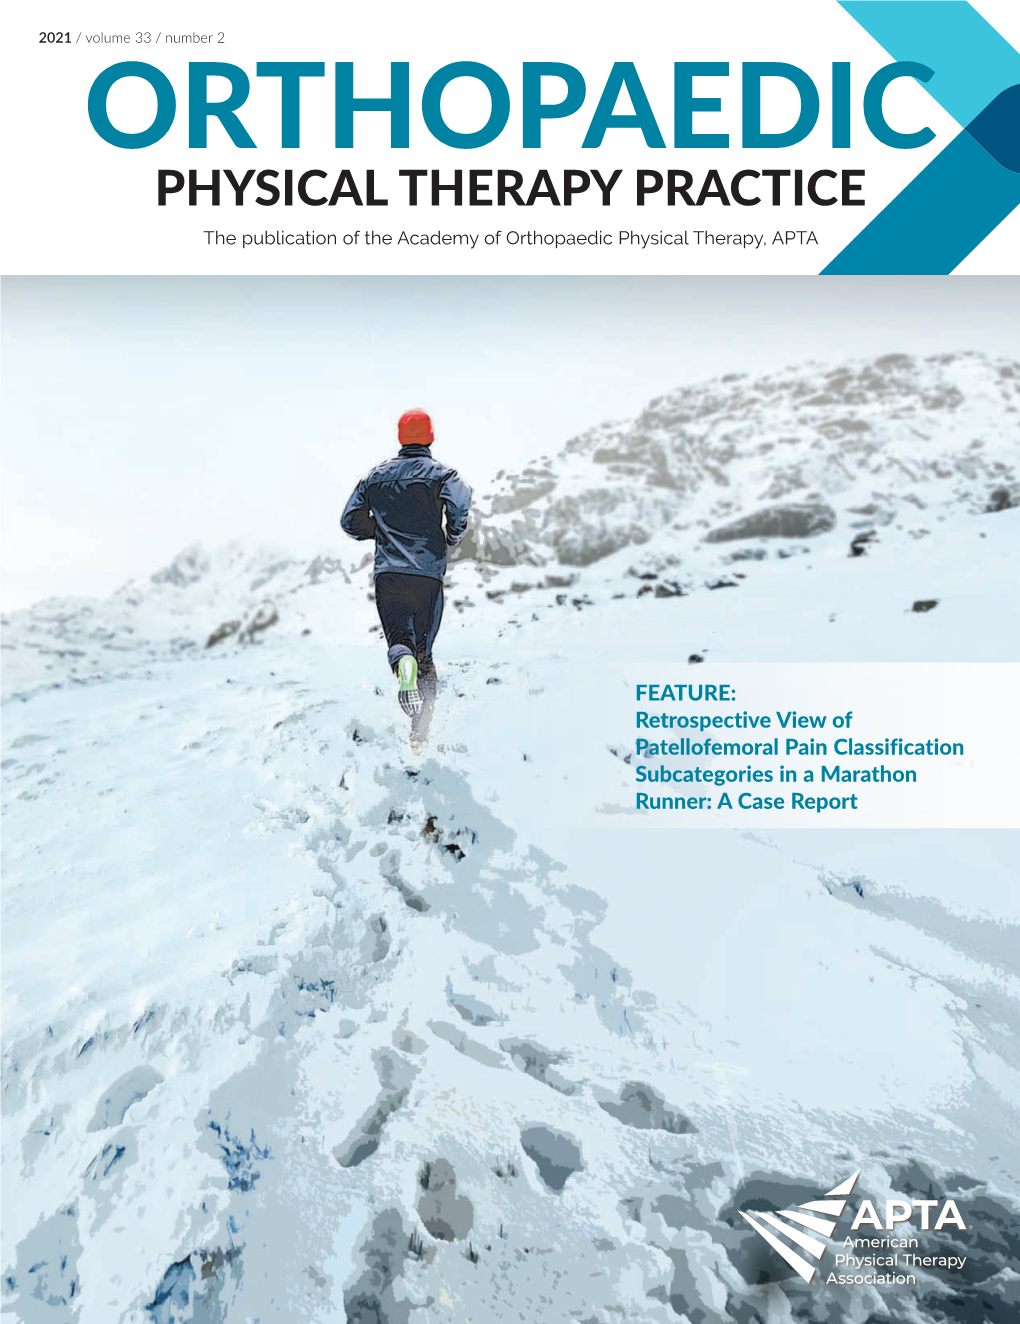 PHYSICAL THERAPY PRACTICE the Publication of the Academy of Orthopaedic Physical Therapy, APTA